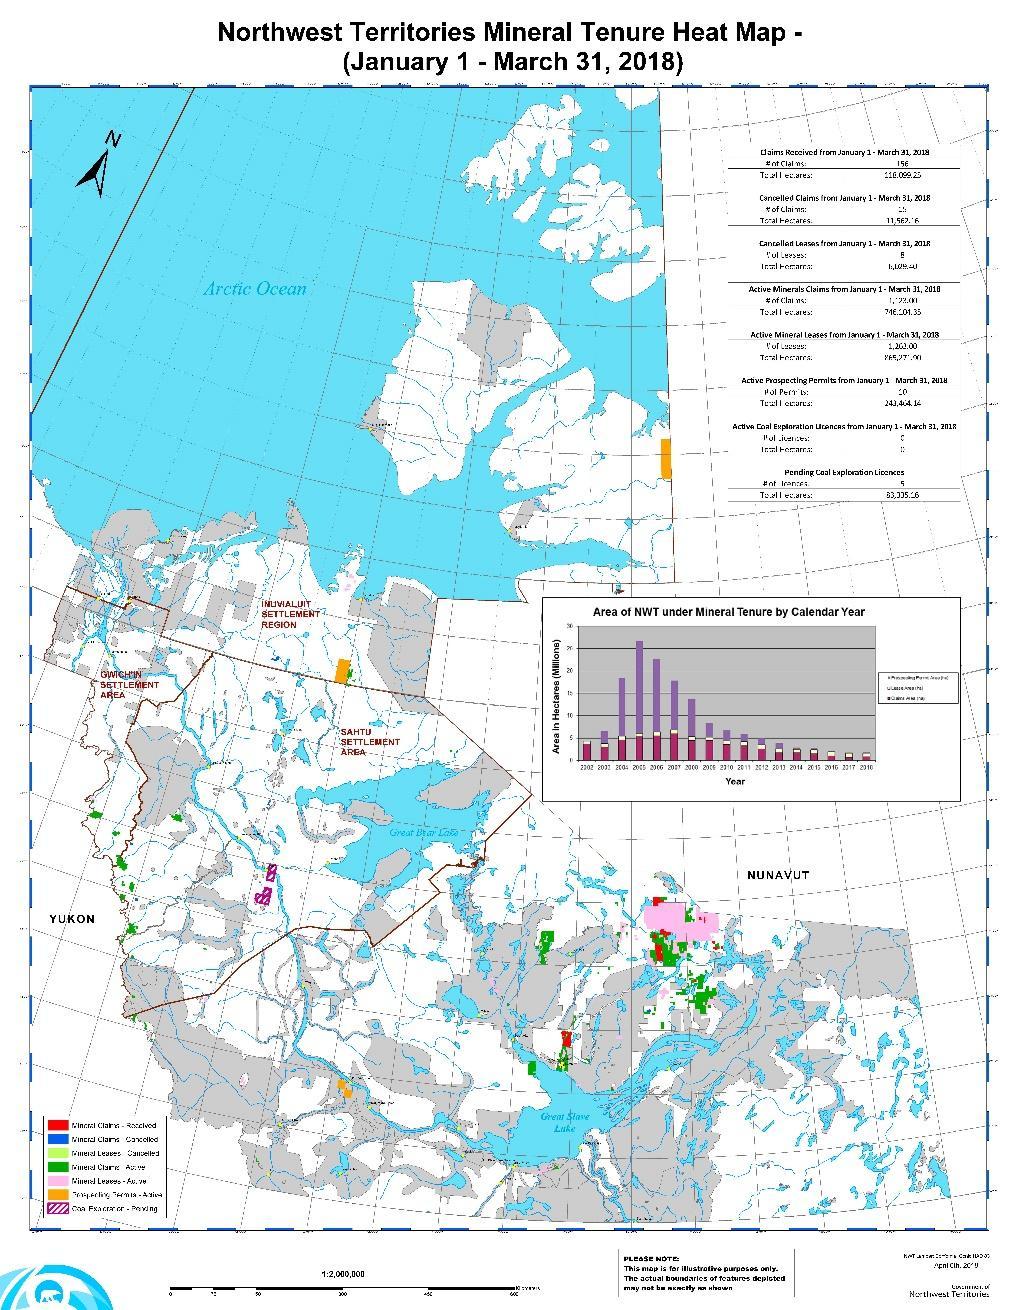 But, we ve closed over 30% of the NWT All the grey is off limits to exploration Conservation Land claims